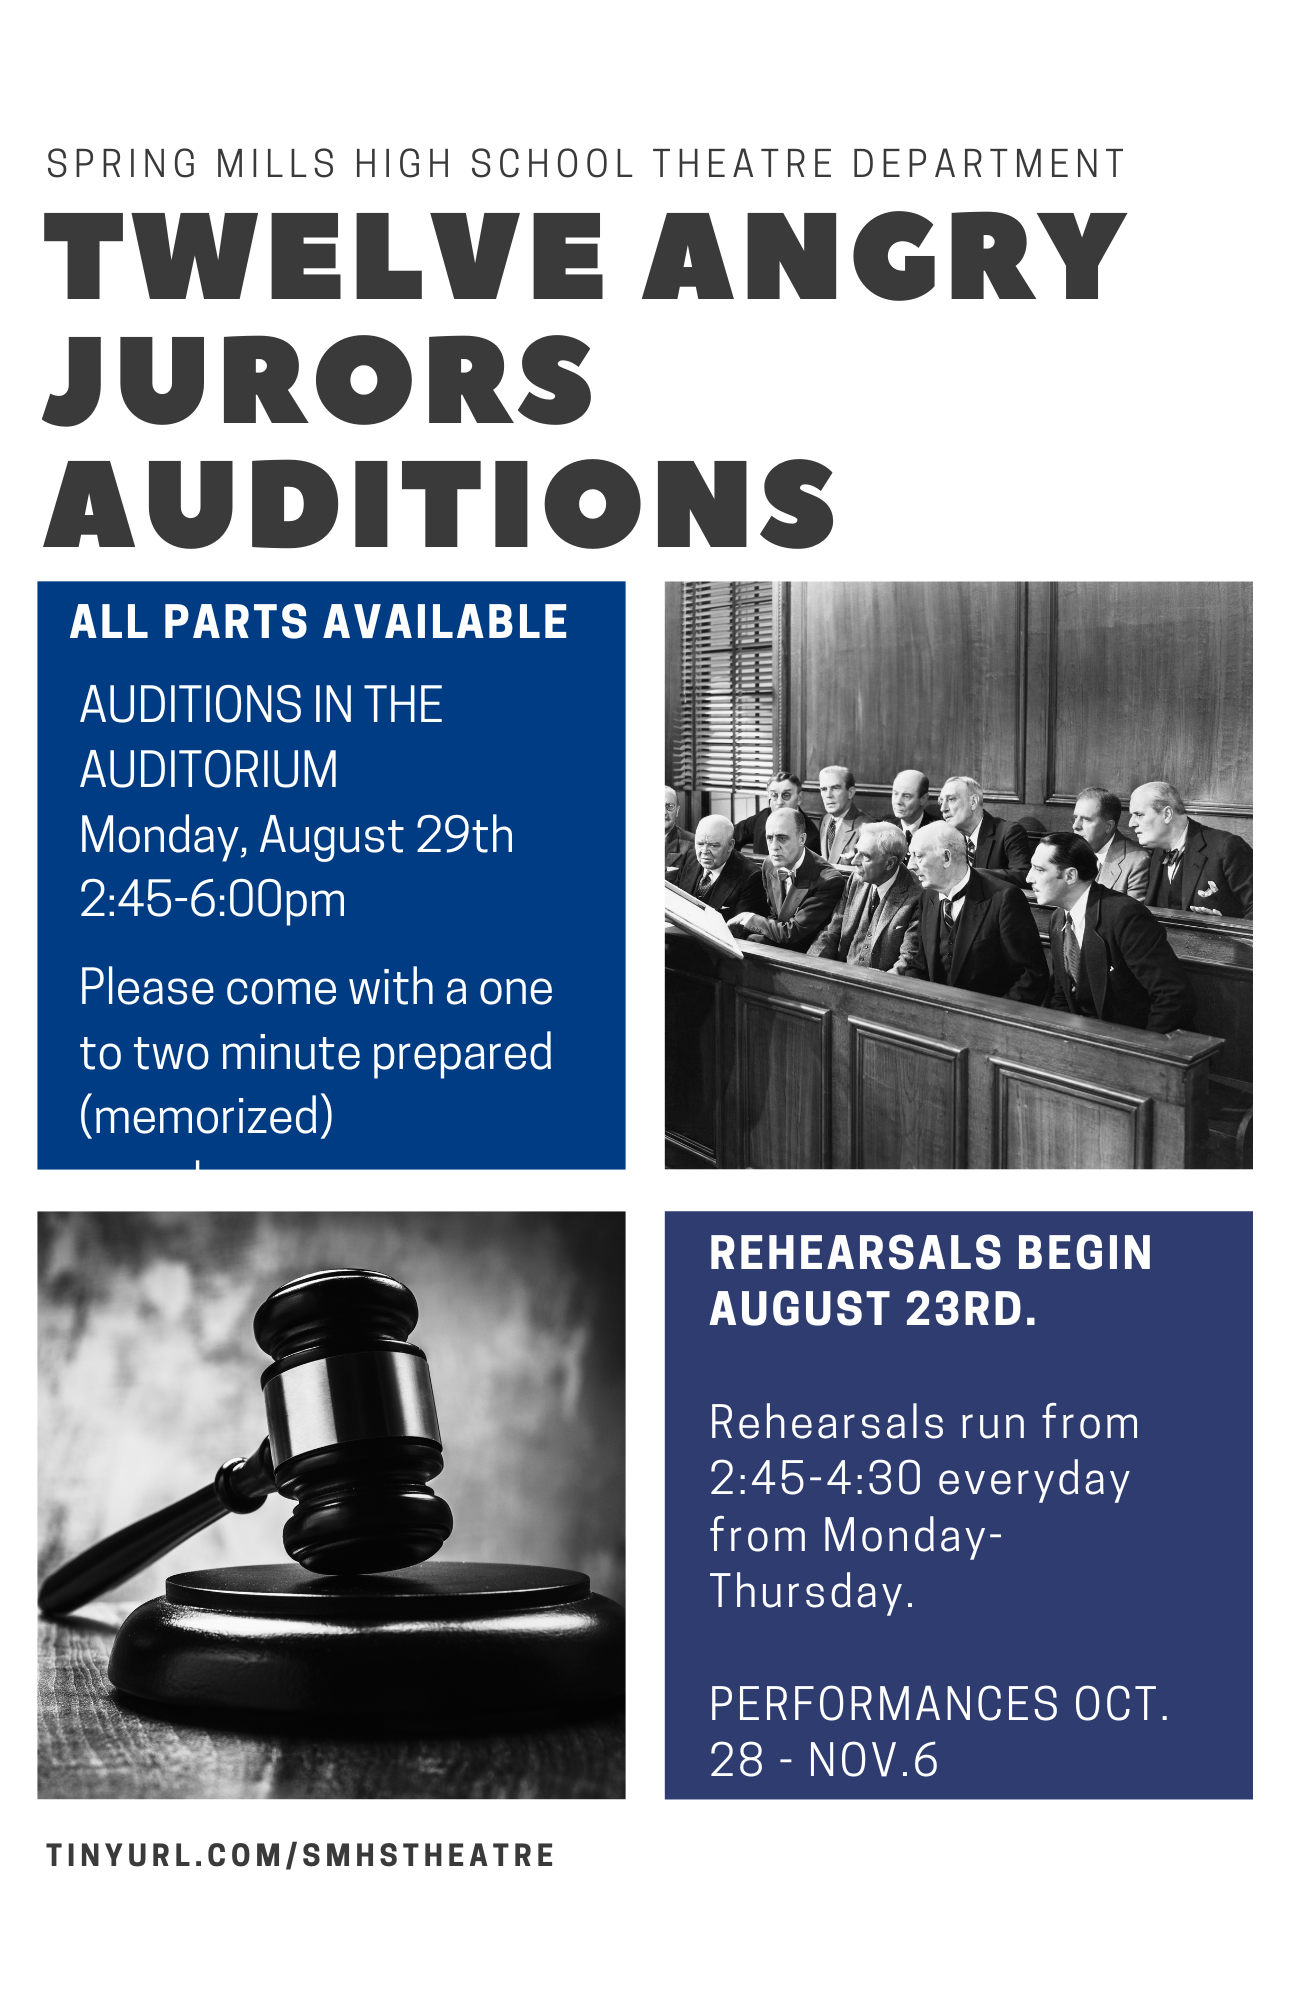 spring mills high school theatre department - twelve angry jurors auditions - all parts available auditions in the auditorium monday, august 29th2:45-6:00pm please come with a one to two minute prepared (memorized) - rehearsels begin august 23rd. rehearsals run from 2:45-4:30 everyday from monday-thursday. performances oct.28 - nov.6 - tinyurl.com/smhstheatre